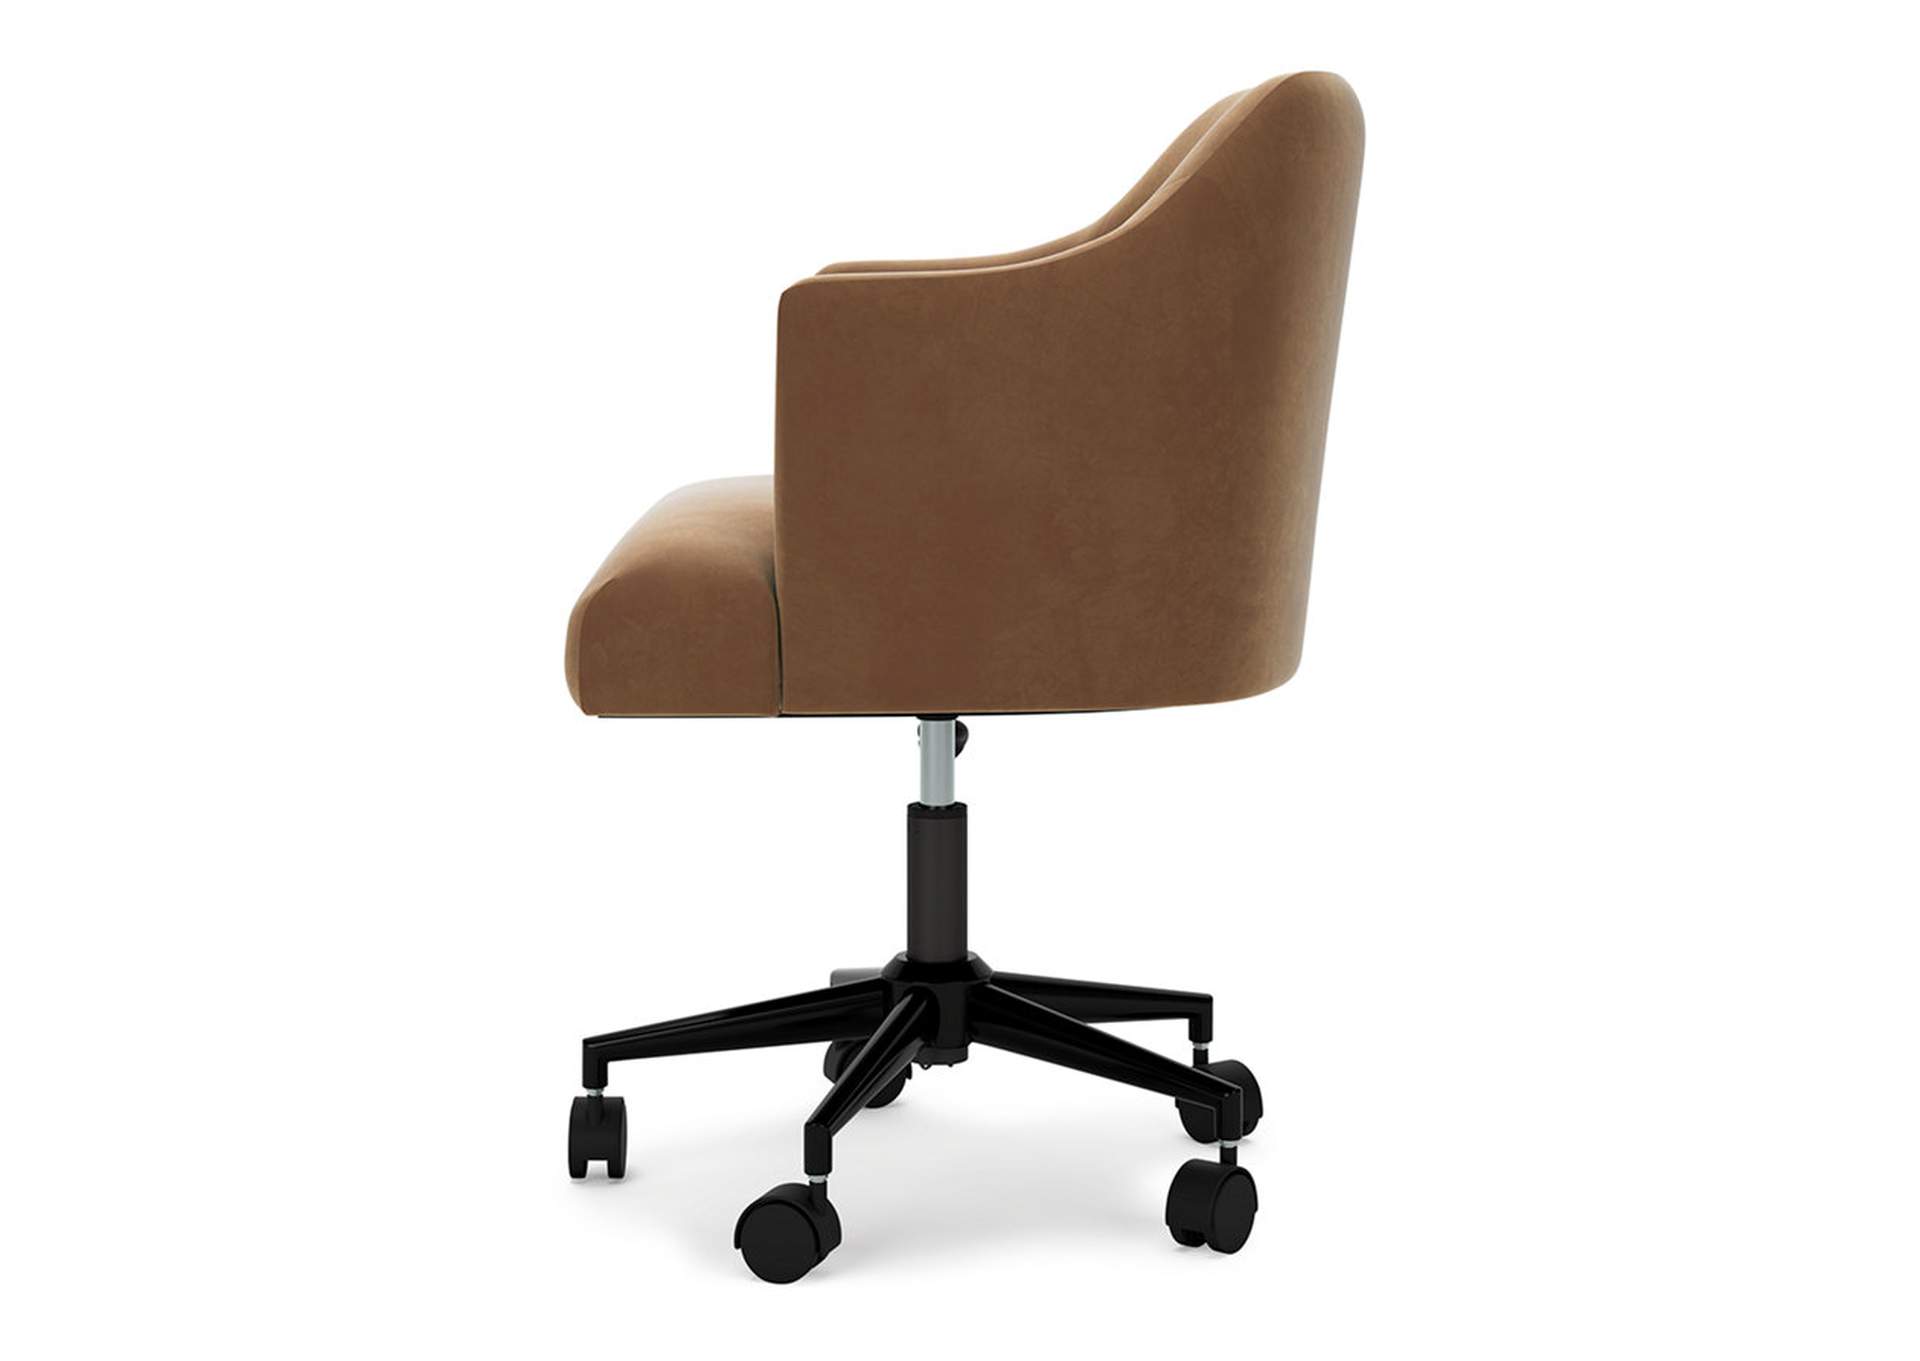 Austanny Home Office Desk Chair,Signature Design By Ashley